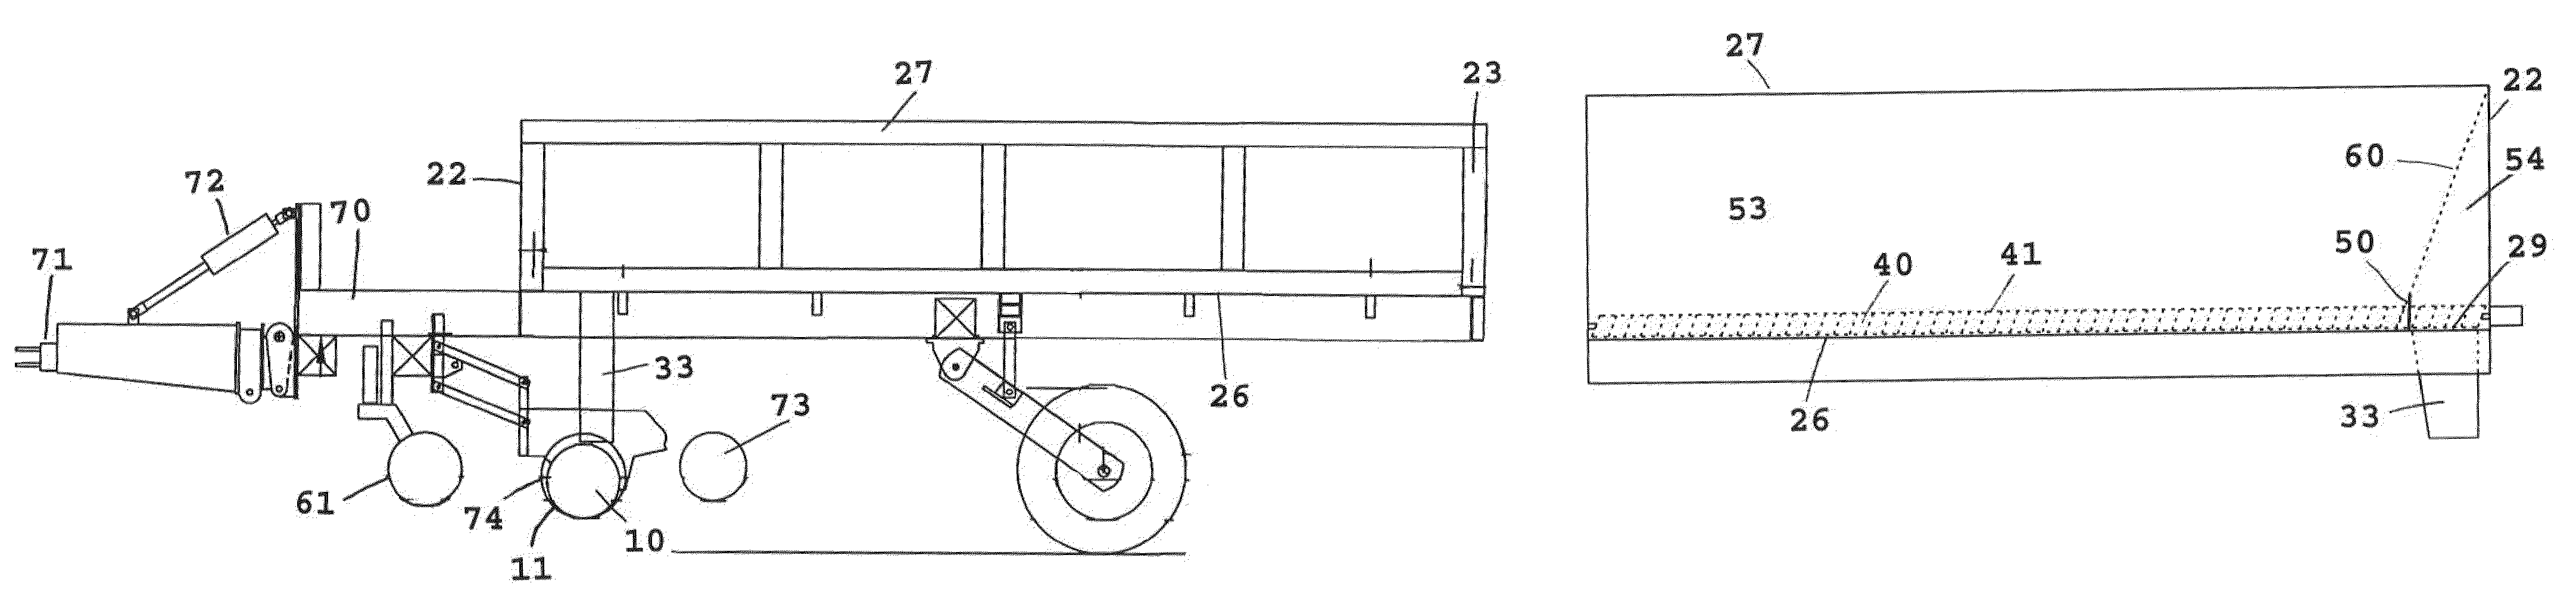 System for distributing poultry litter below the soil surface